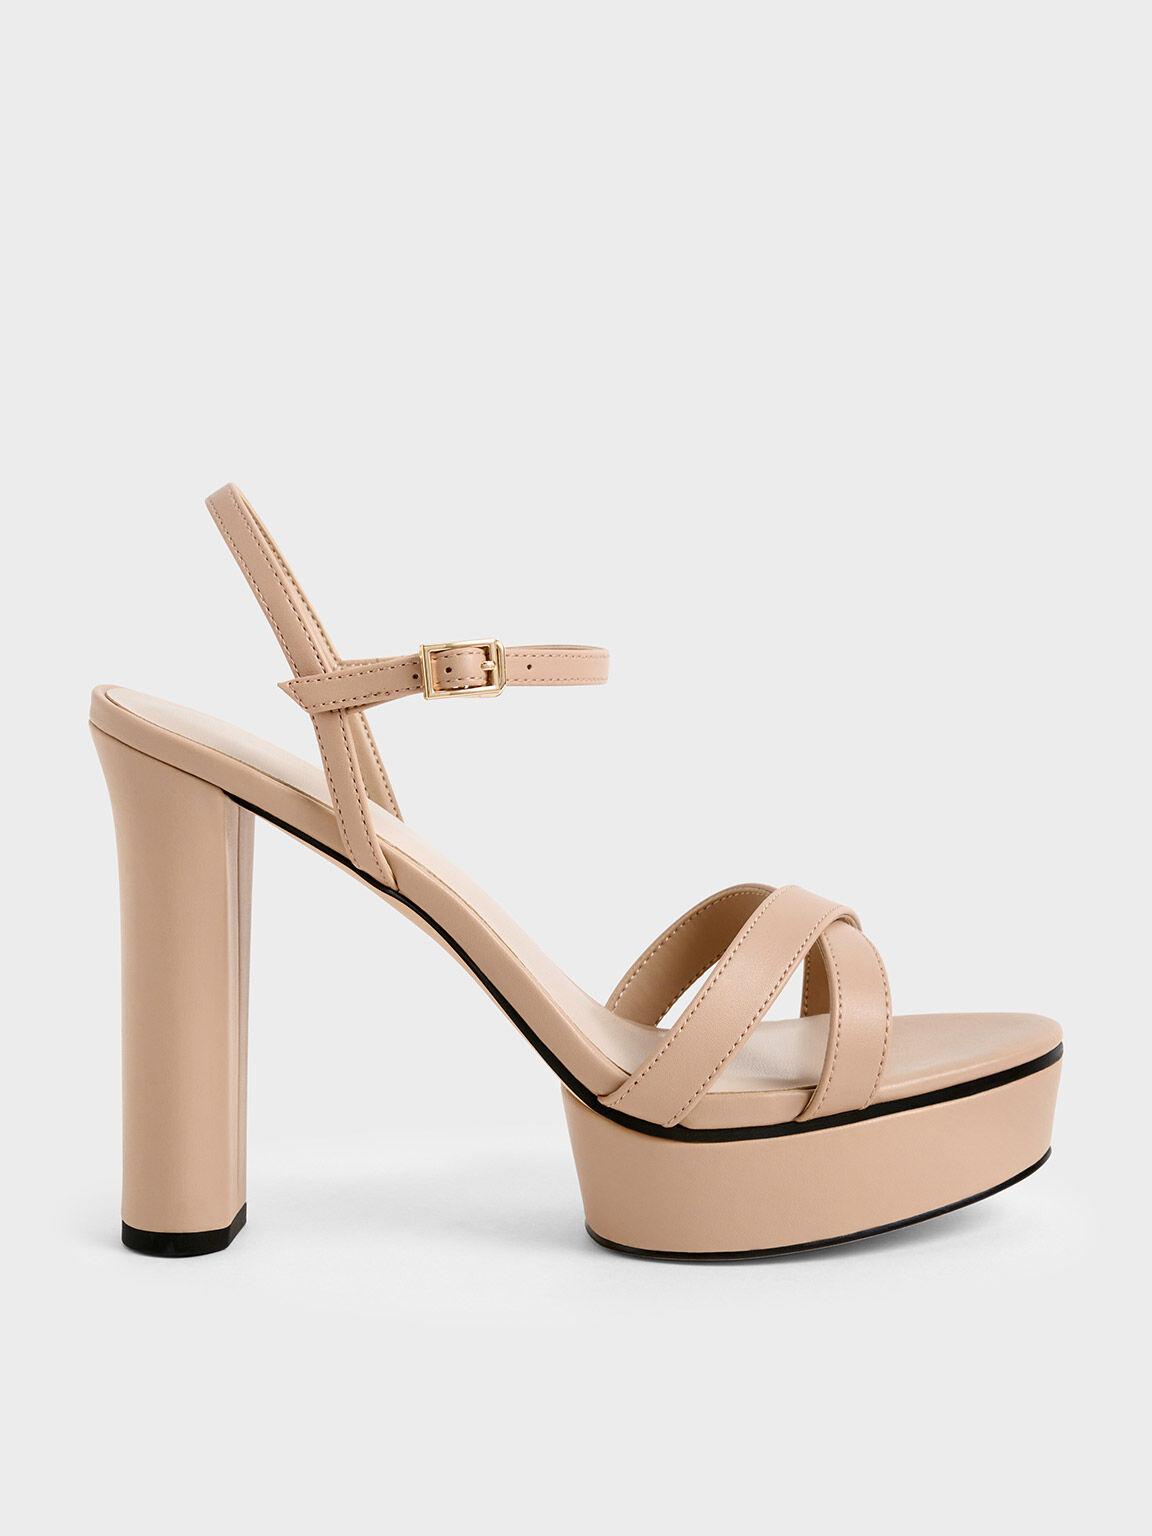 23 Comfortable Heels for Weddings: Pumps, Mules, & Strappy Sandals | Condé  Nast Traveler